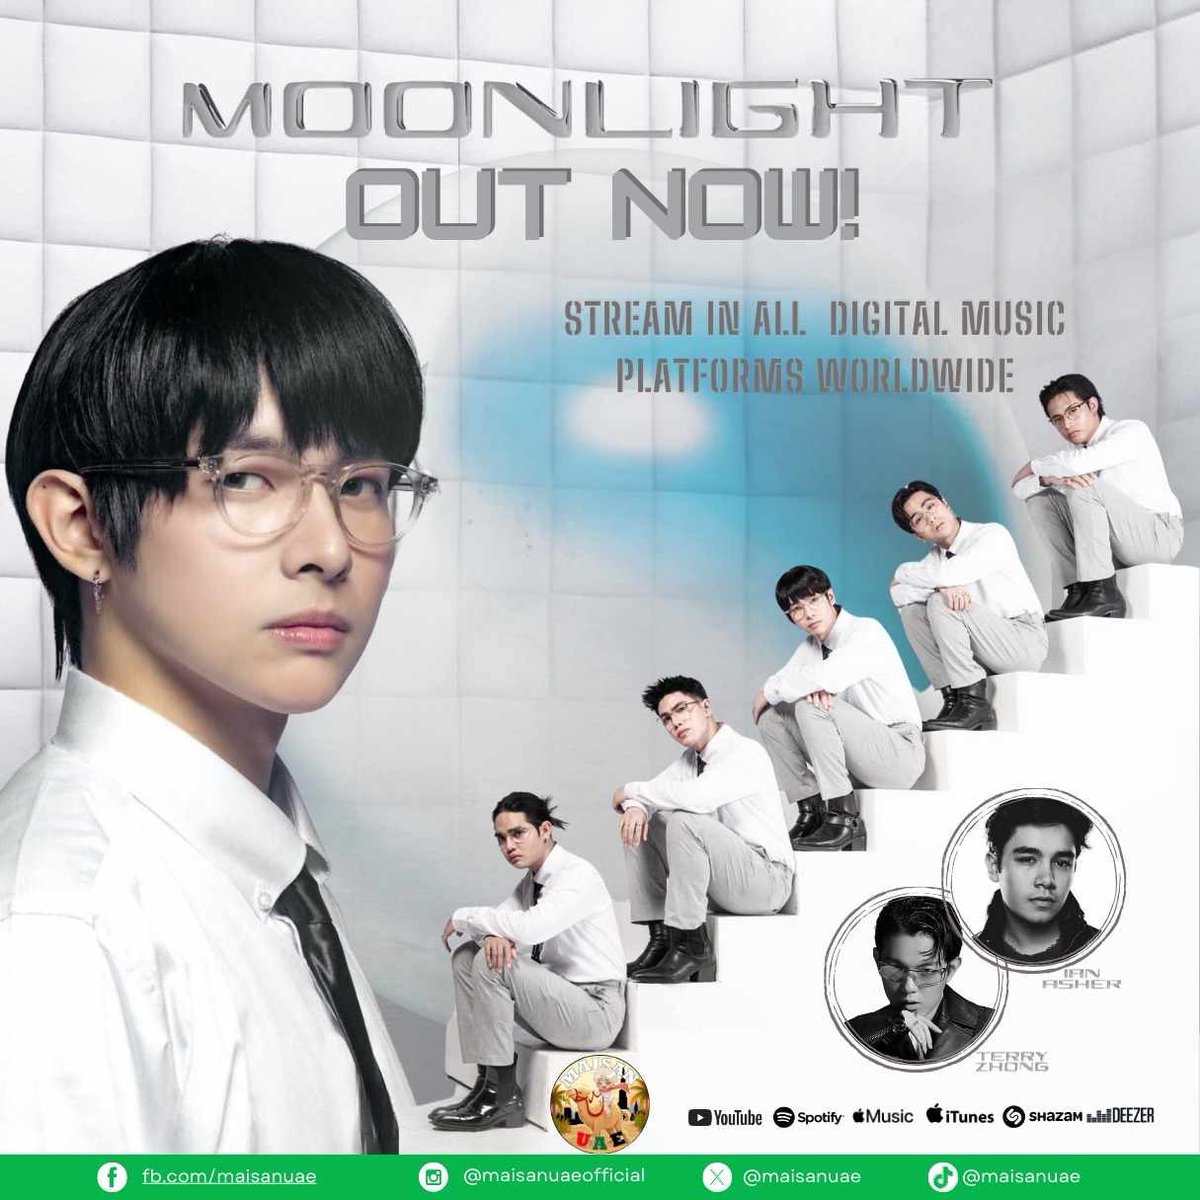 🤩🤩🤩🤩🤩

'Moonlight'
is out now!
Let's stream in all digital music platforms!

This is it mga kaps 🥰

@SB19Official
#SB19 #IanxSB19xTerry #MOONLIGHT #MOONLIGHT_MVTeaser #streamnow #fyp